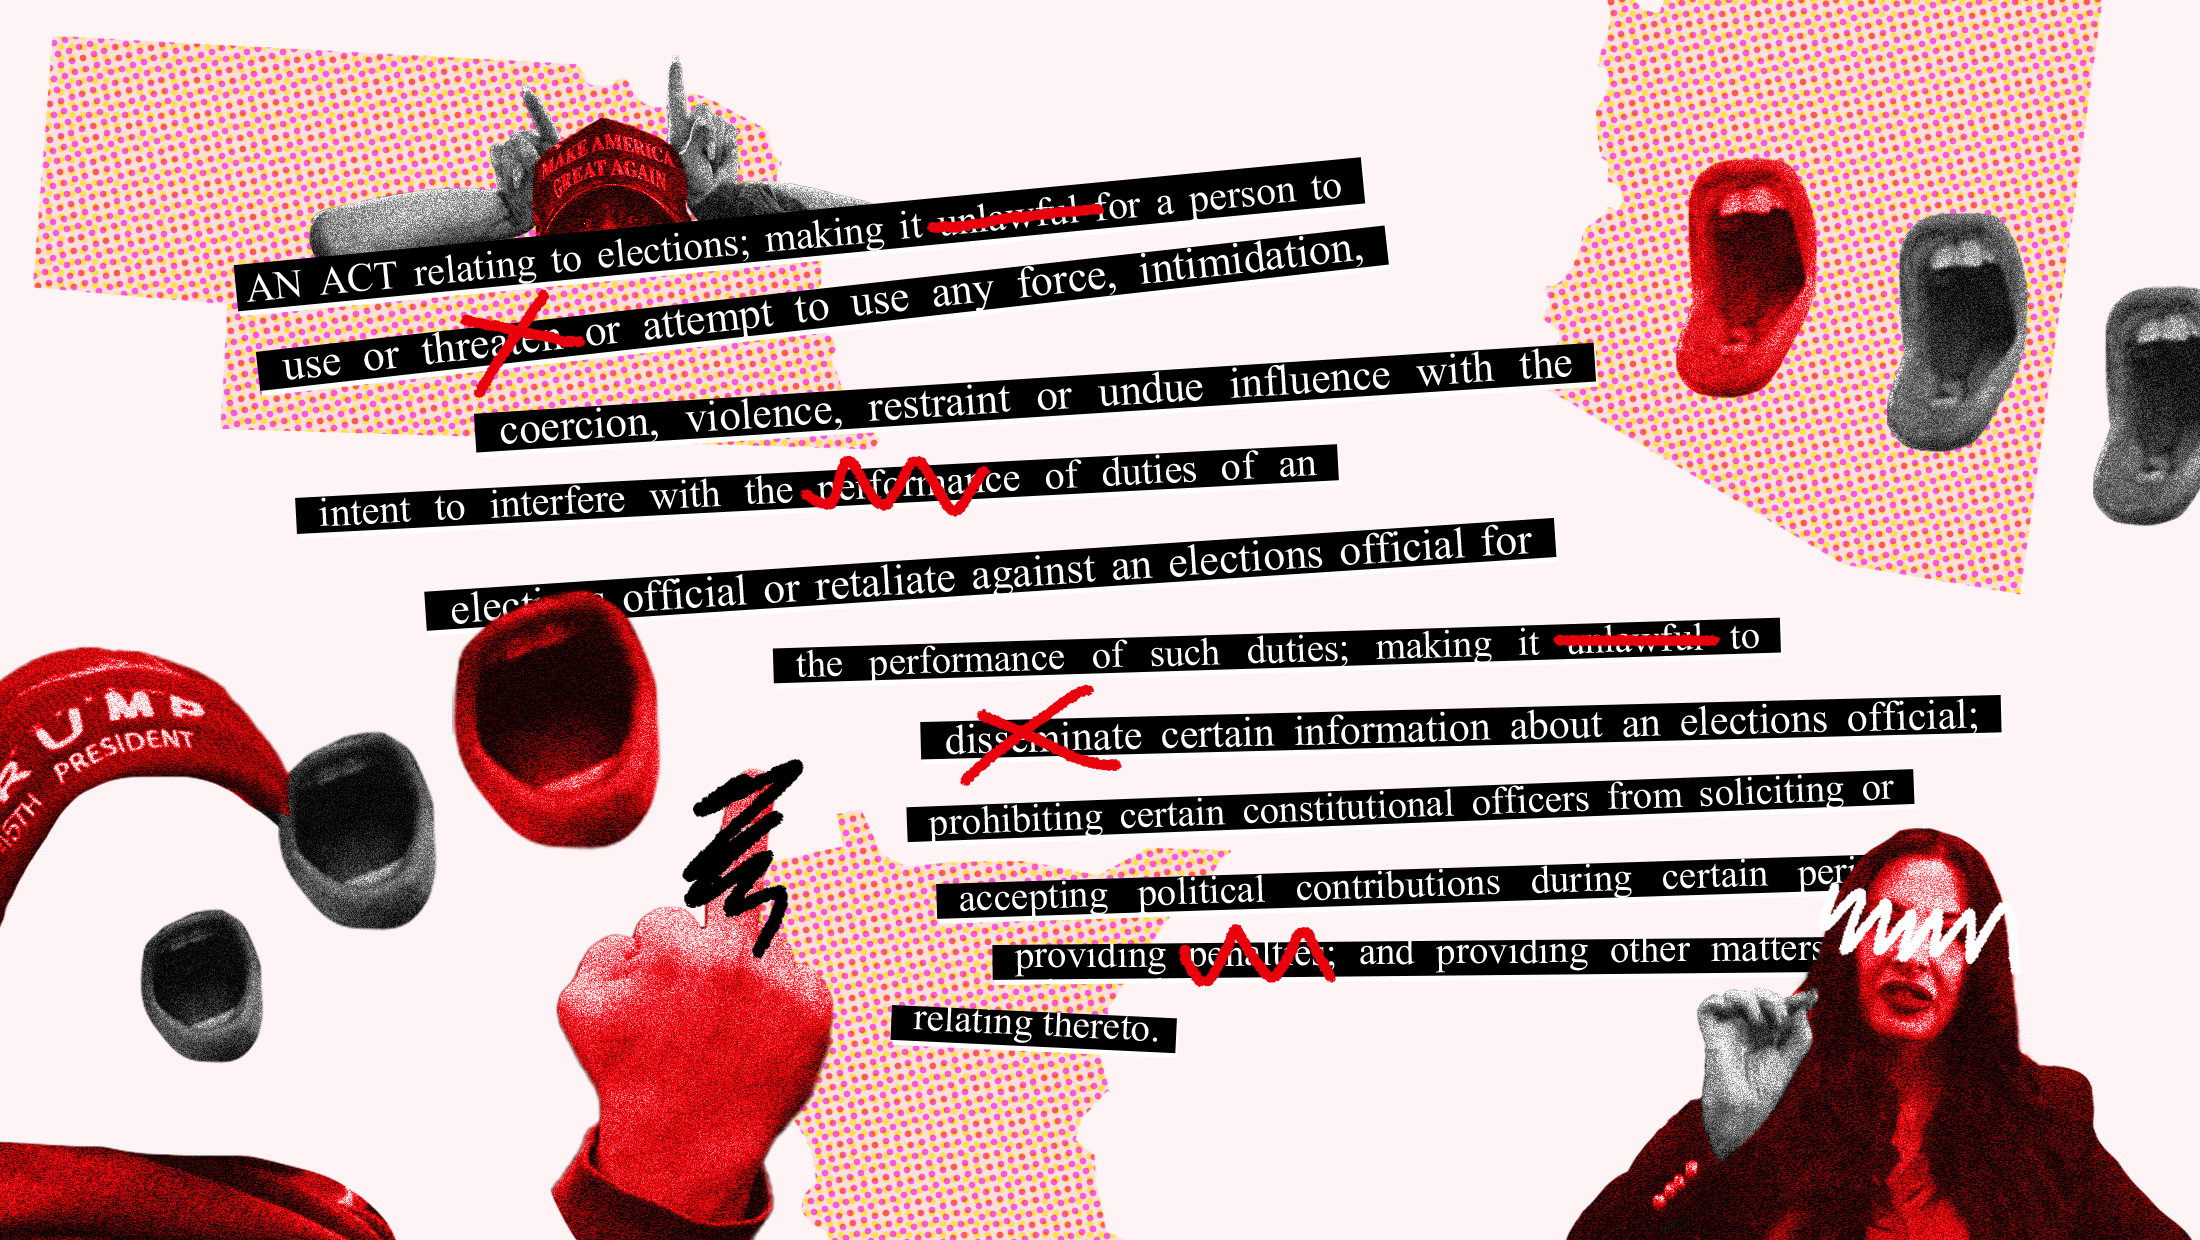 Light red background with black text boxes that quote parts of Nevada's recently enacted Election Worker Protection Law and scribbles over certain words to indicate that the law is being challenged by Republicans. Other elements include MAGA hats, an image of Sigal Chattah who ran for the Republican nomination for Nevada AG and someone holding up the middle finger.